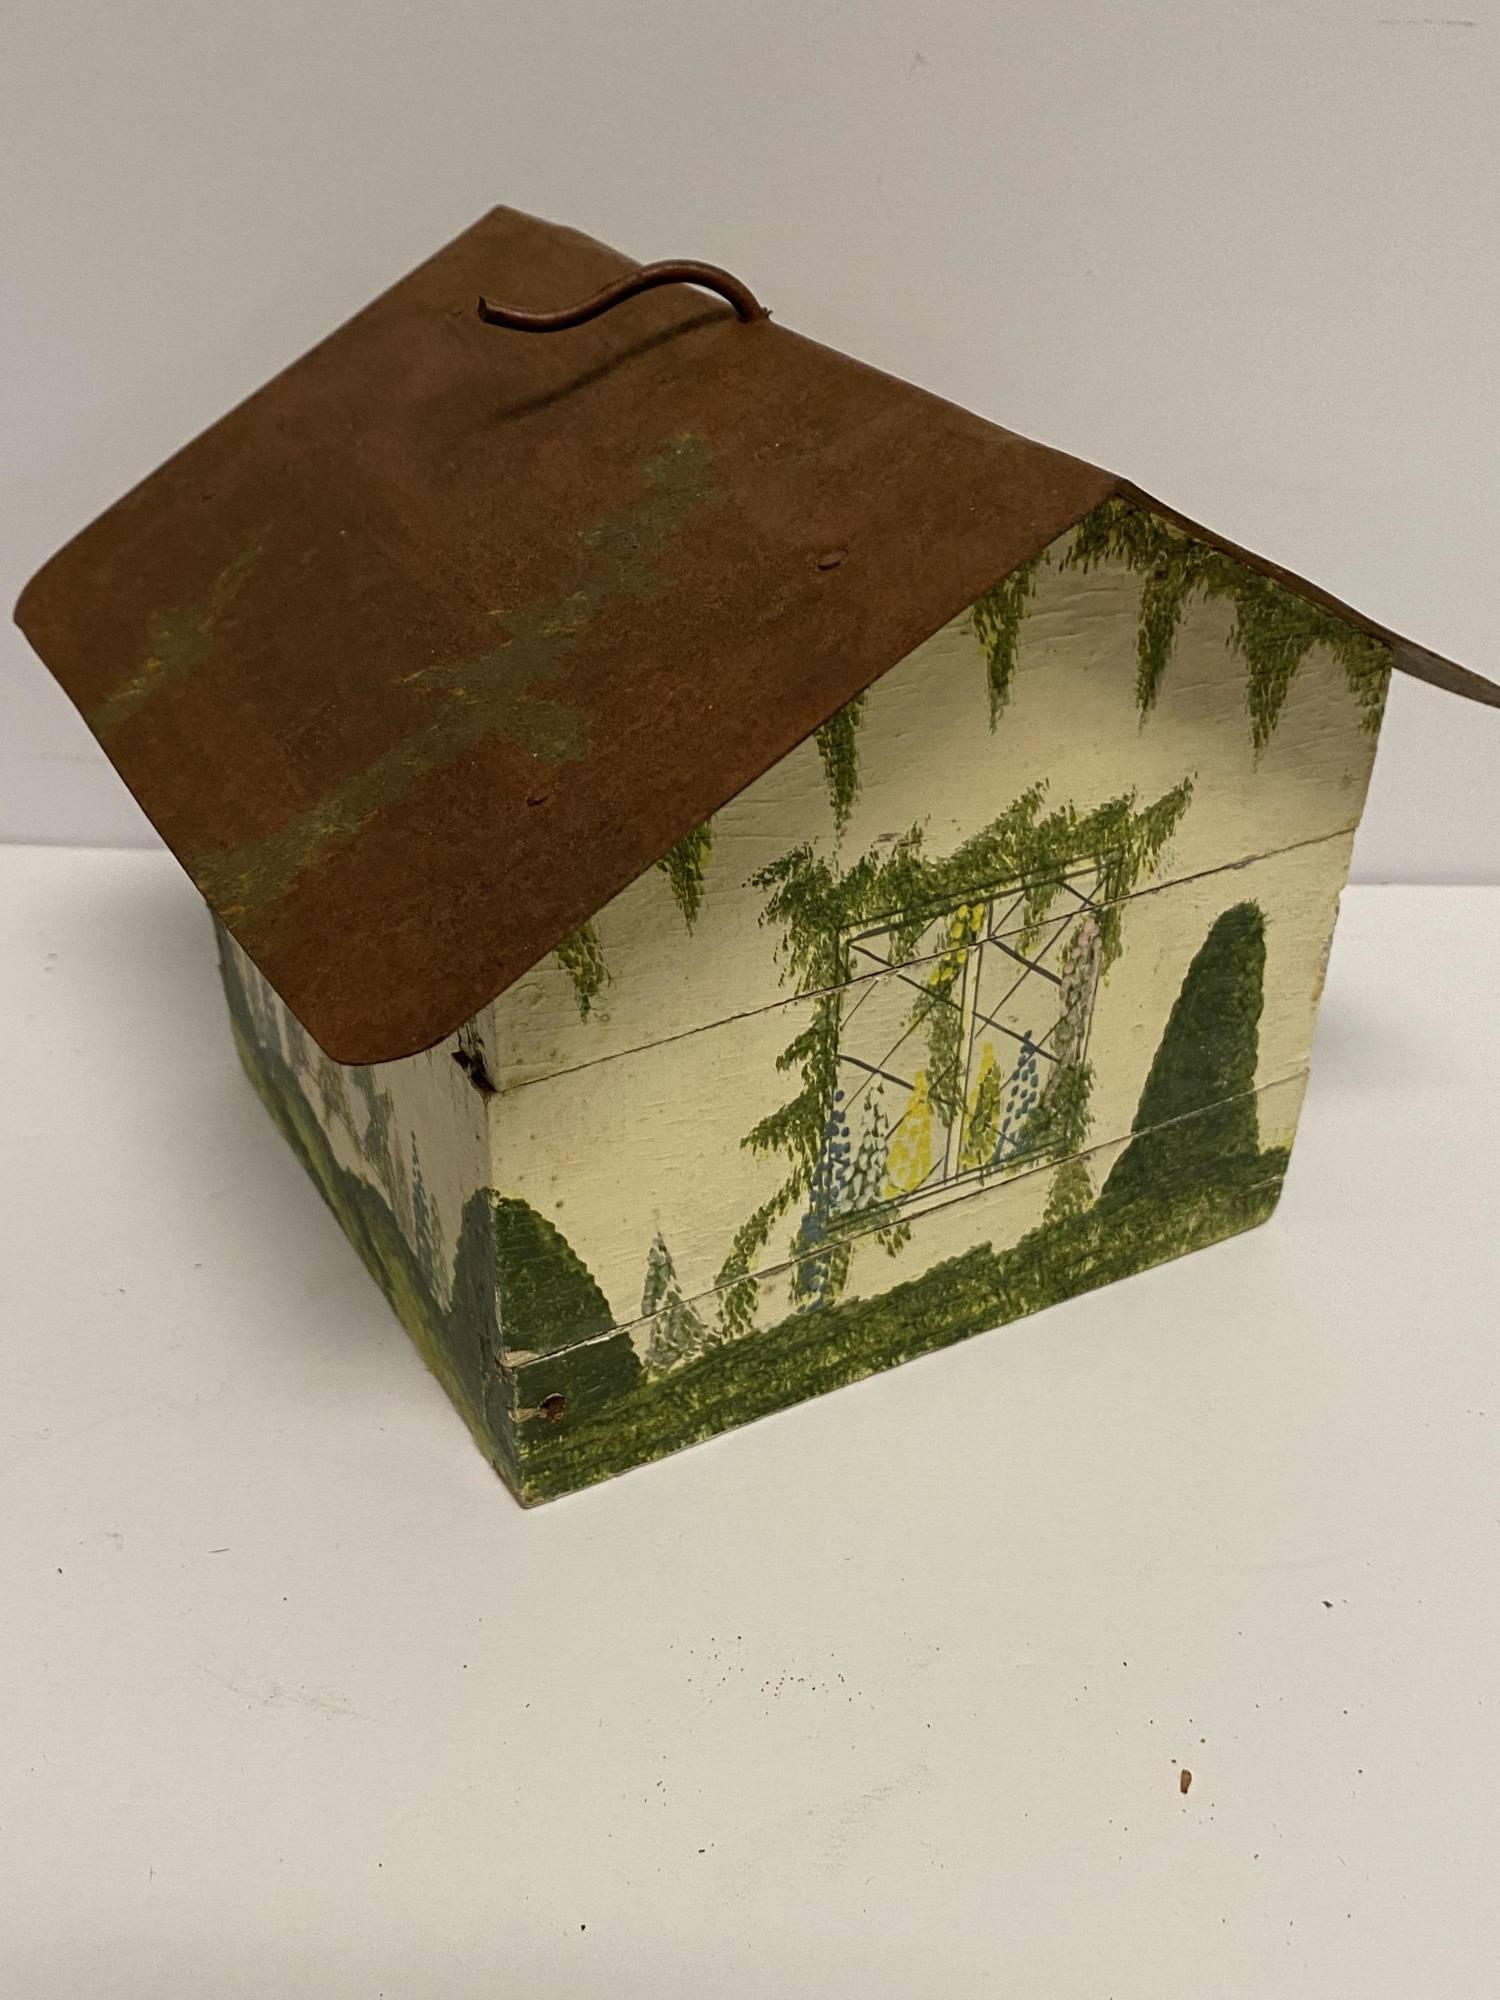 WOODEN BIRDHOUSE WITH METAL ROOF